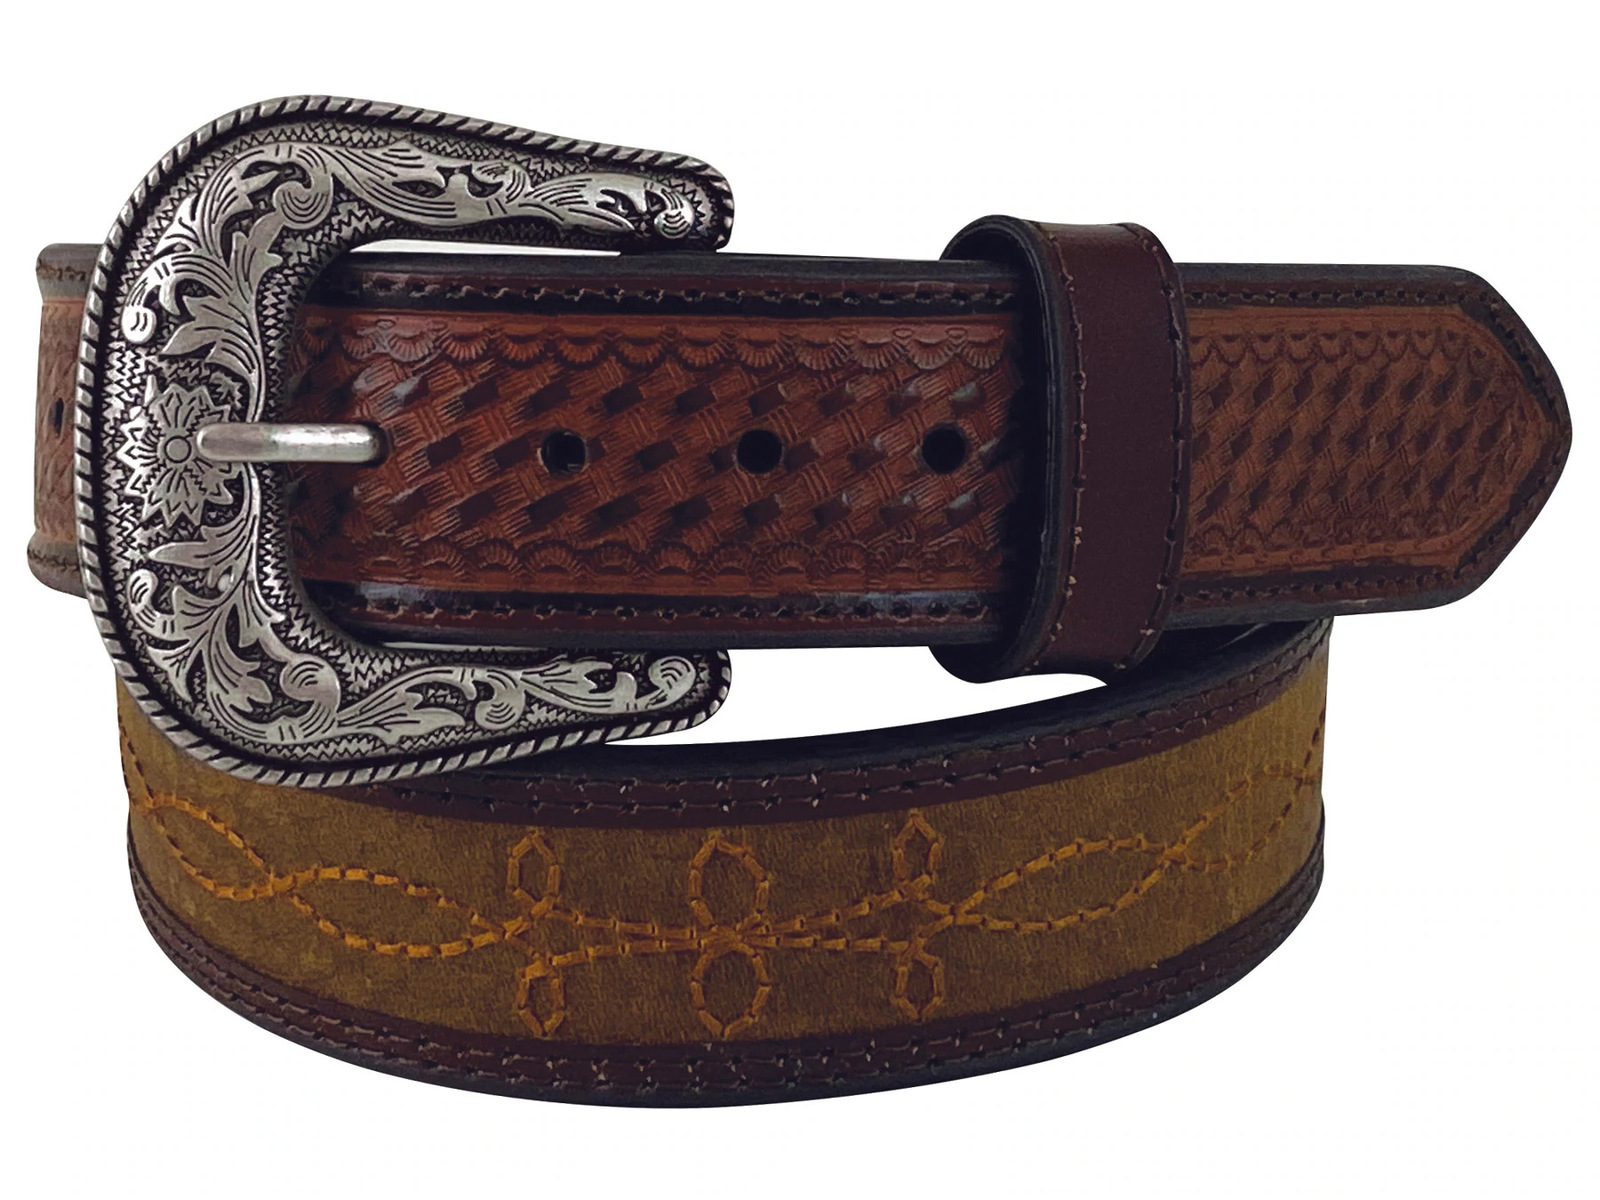 The Crazy Horse Men's Stitched Leather Belt